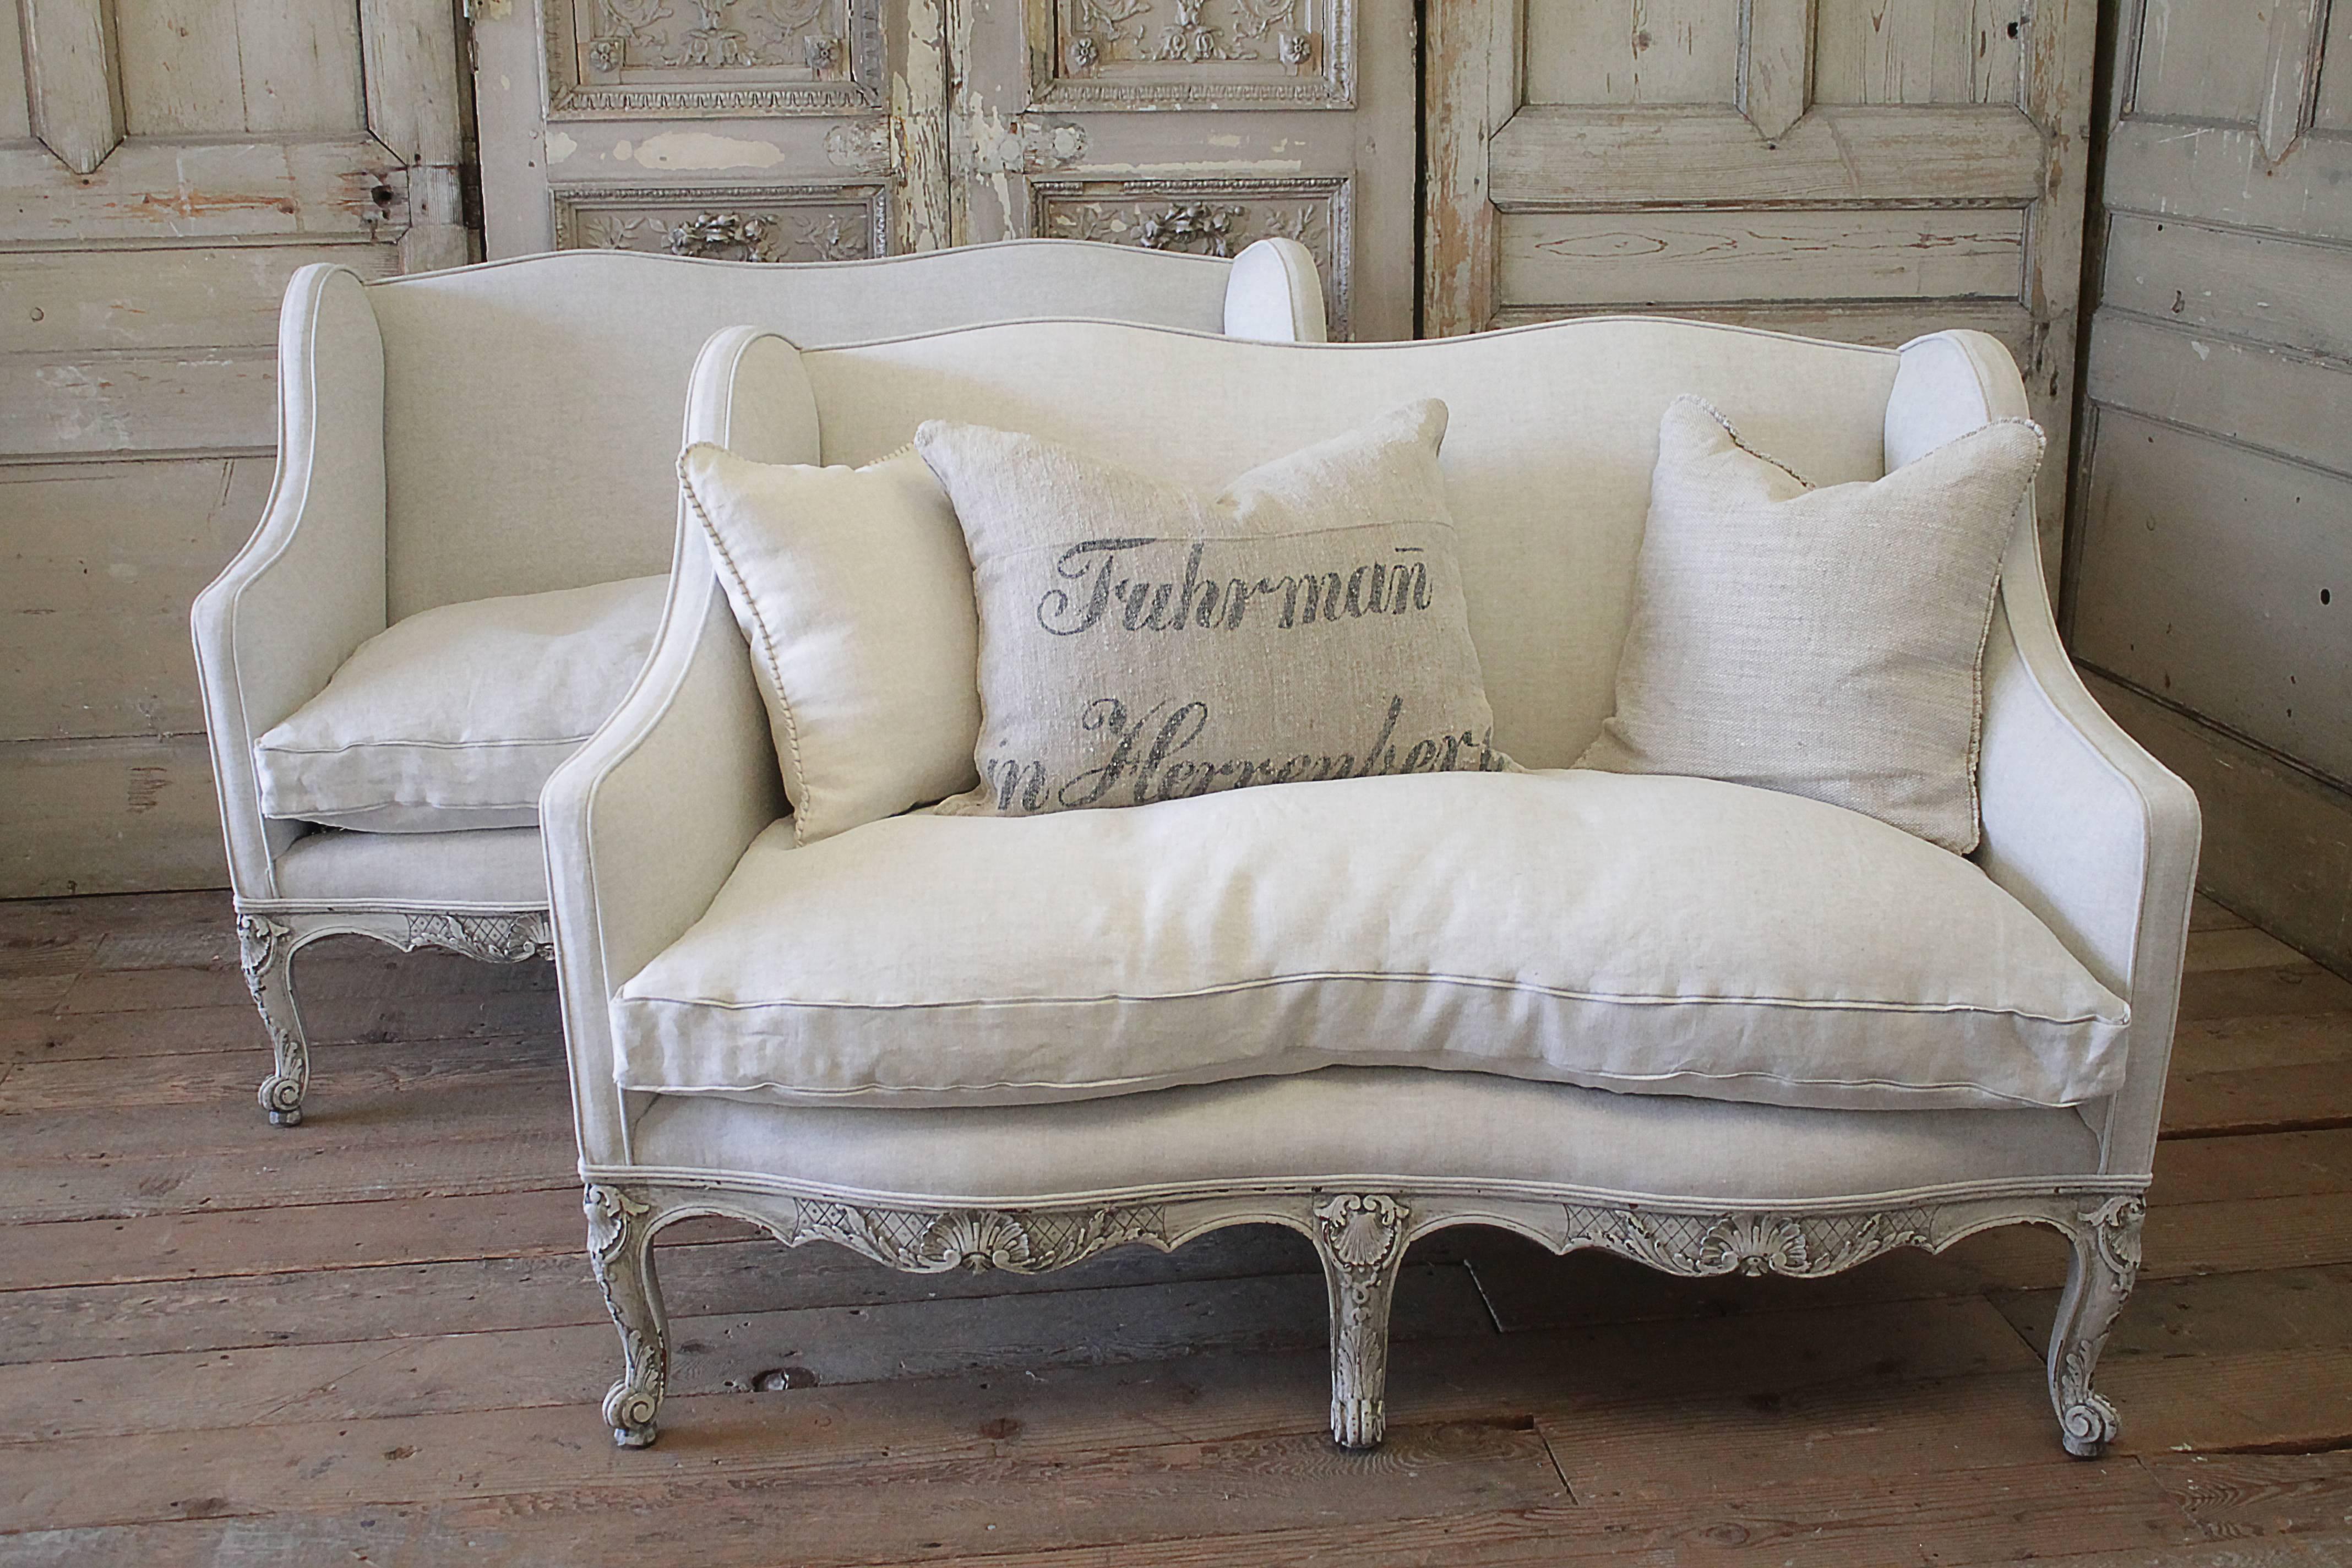 Beautiful painted pair of vintage settees from the 1930s. The base is solid carved walnut that has been painted in our soft oyster white finish, with subtle distressing, and finished with an antique hand rubbed glaze. The finish has a grayish tone.